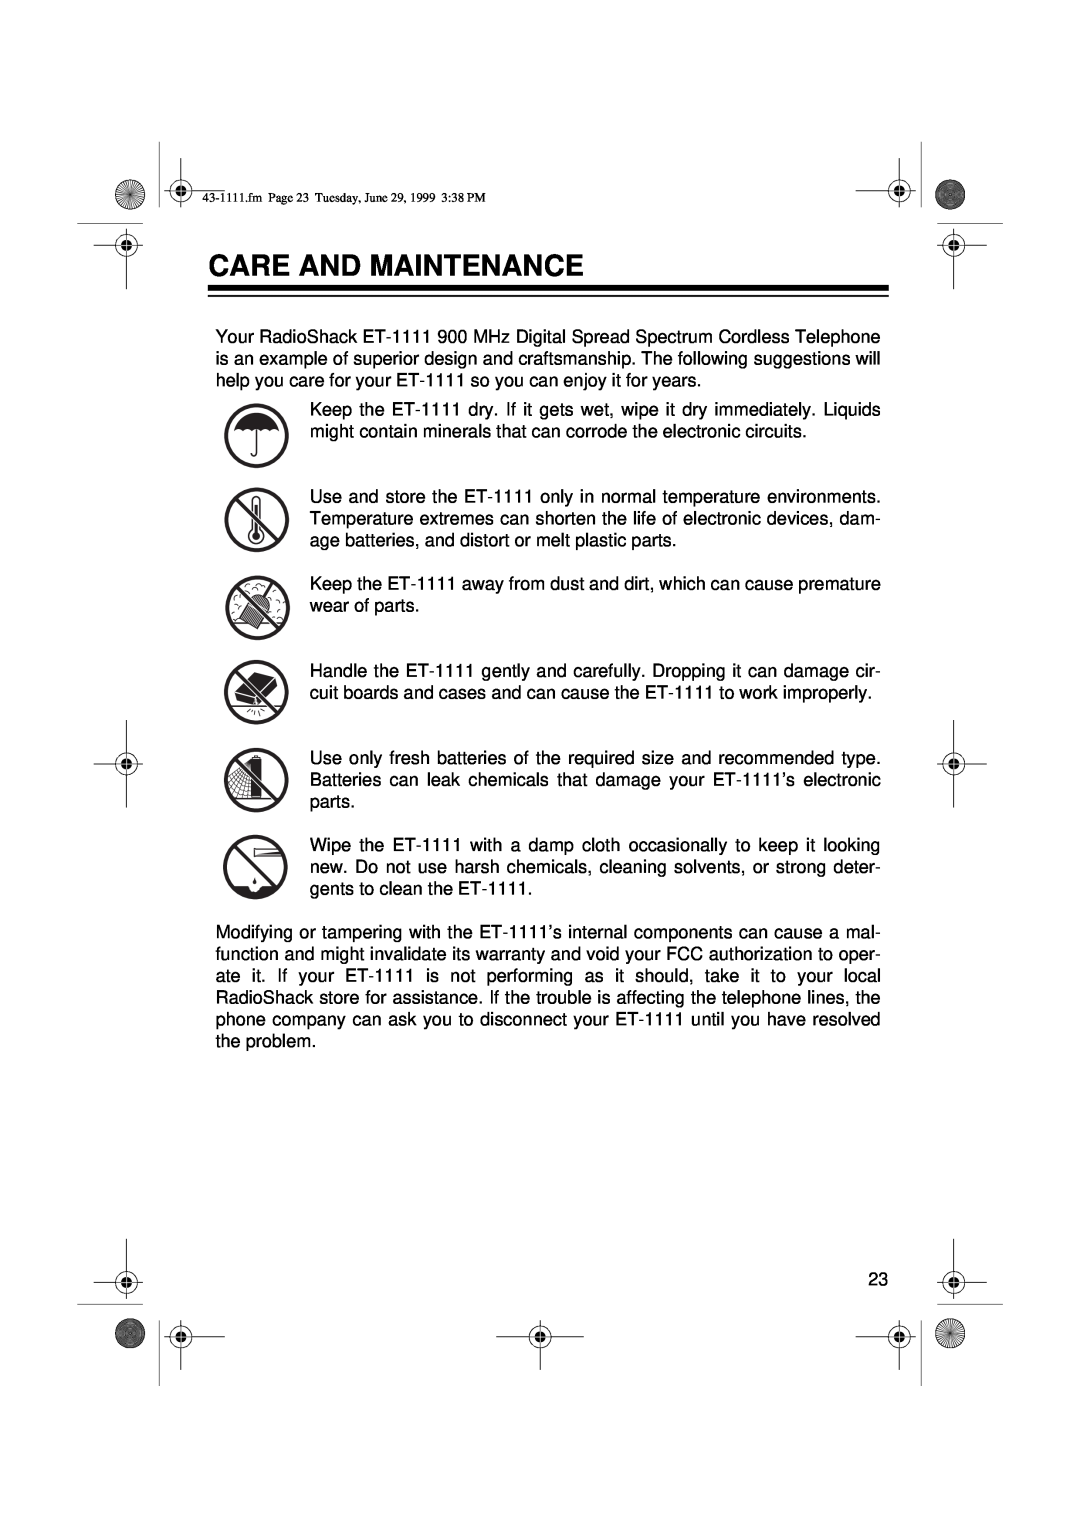 Radio Shack ET-1111 owner manual Care And Maintenance, fm Page 23 Tuesday, June 29, 1999 338 PM 